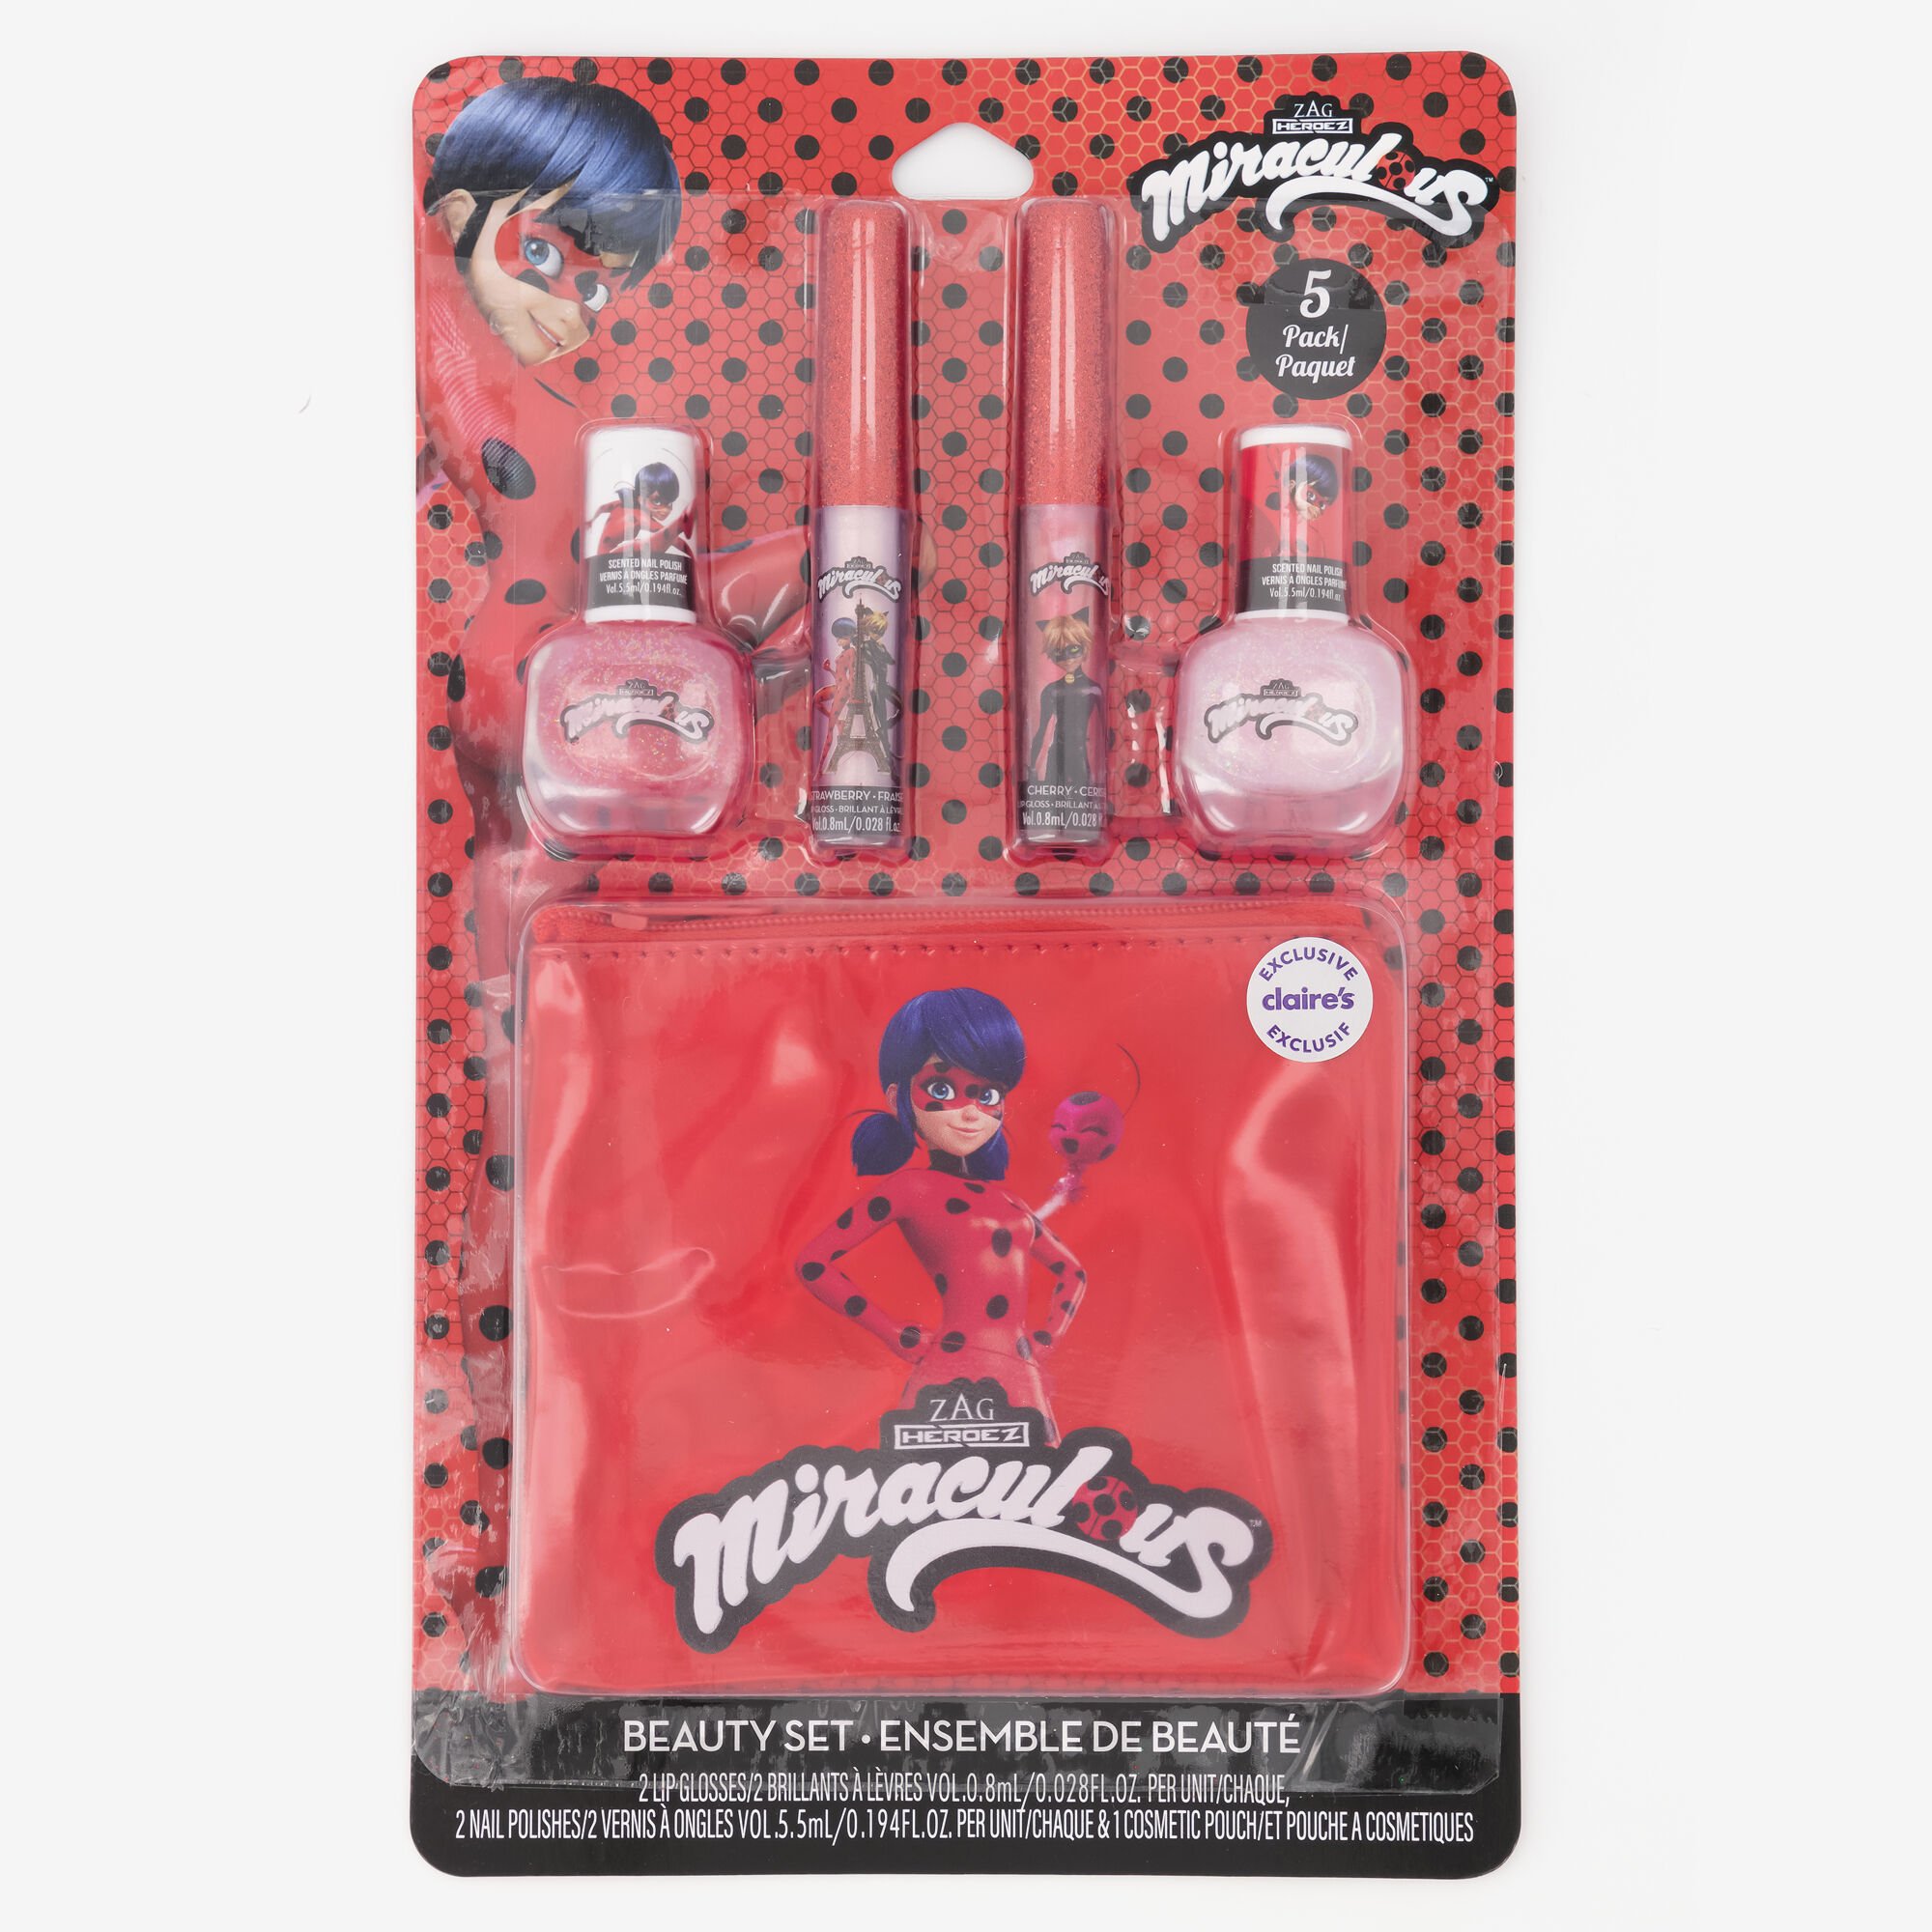 View Claires Miraculous Beauty Set 5 Pack information